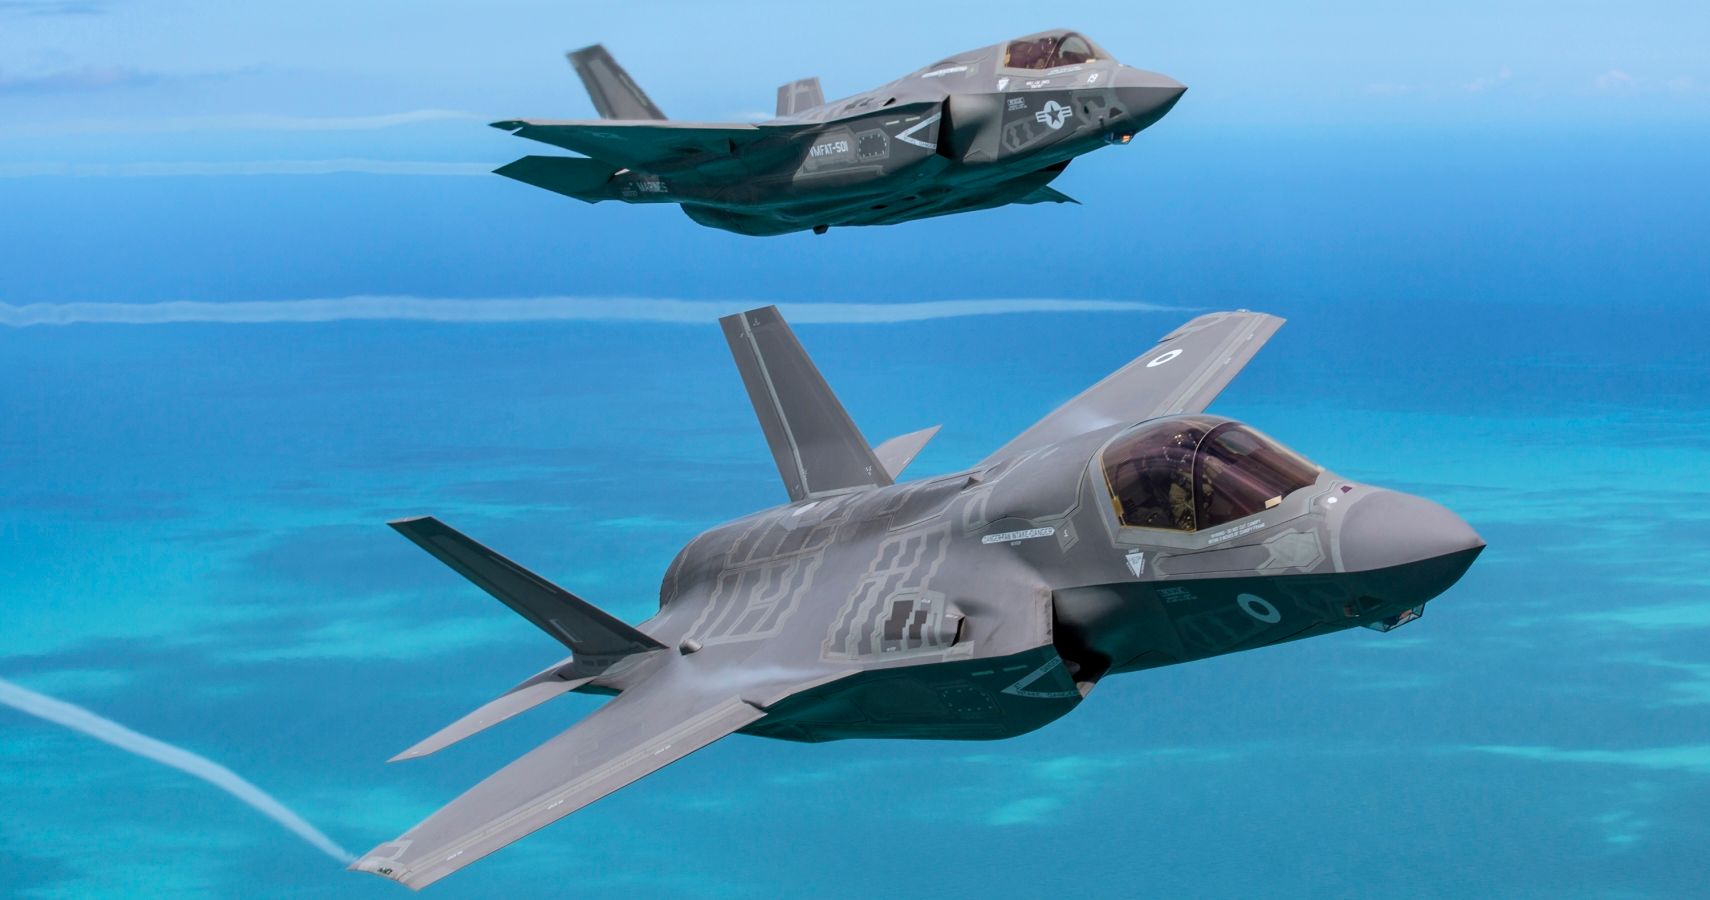 This Is Why The F-35 Lightning Didn't Star In Top Gun: Maverick